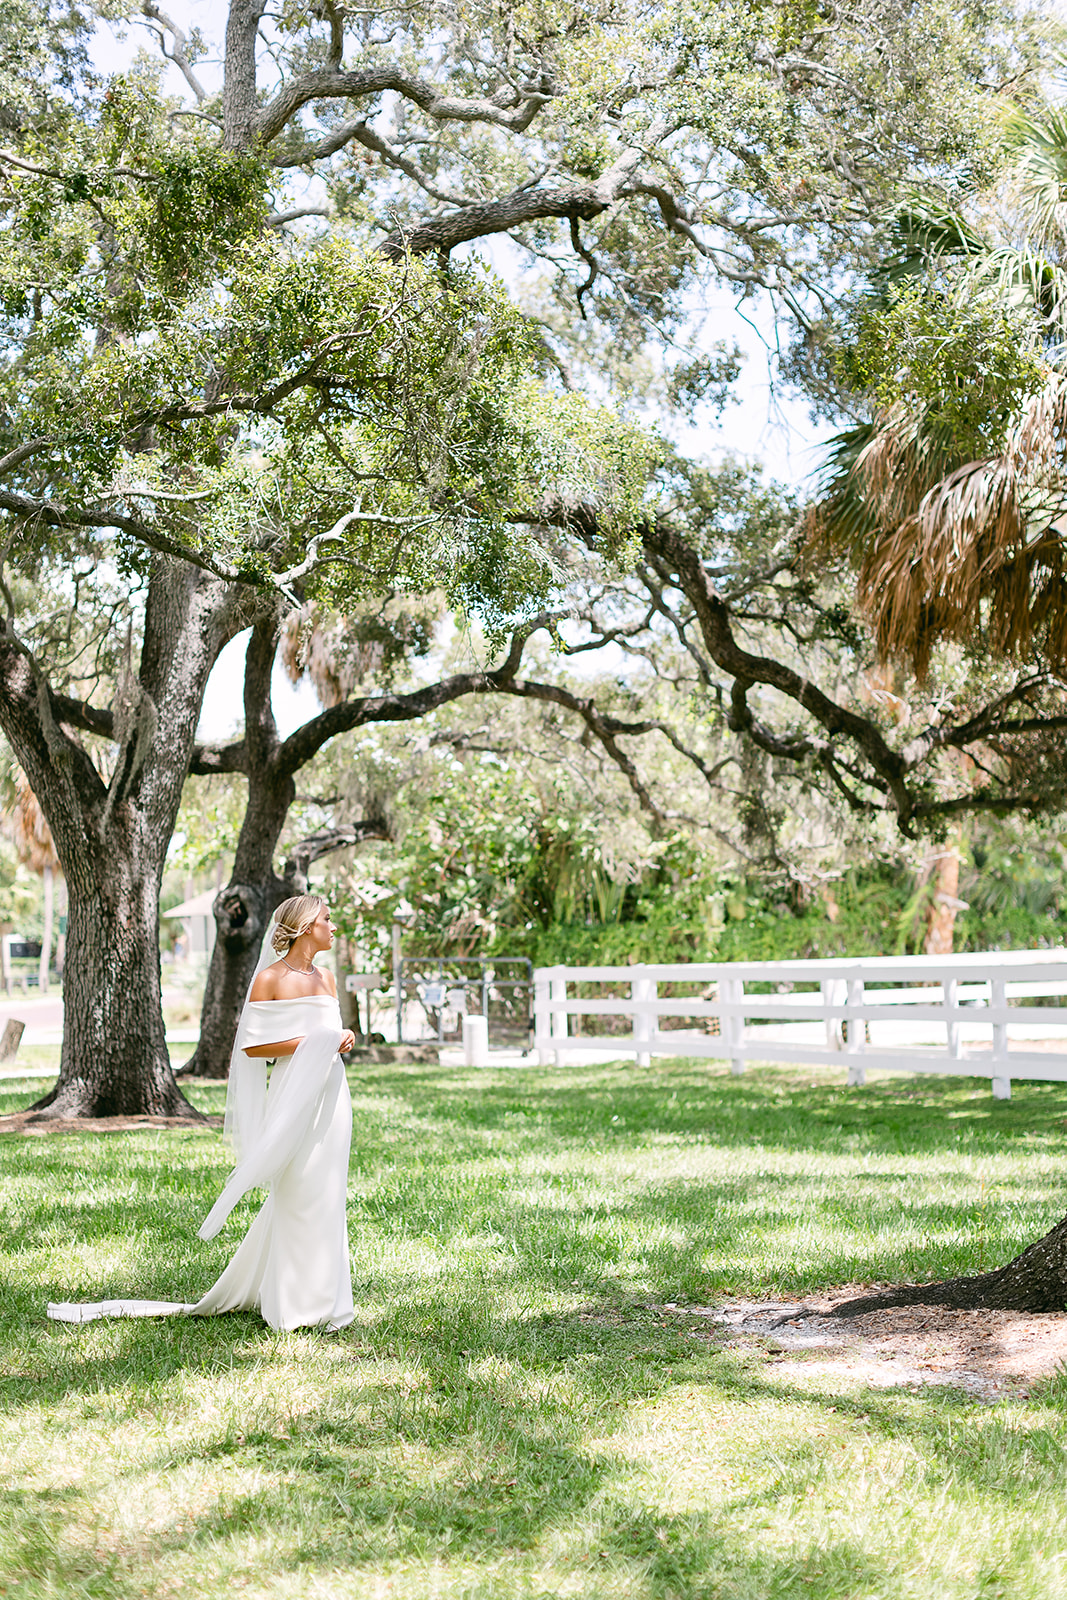 candid bridal portrait, how to pose brides. high end elopement wedding in tampa florida. sarah bradshaw photography.